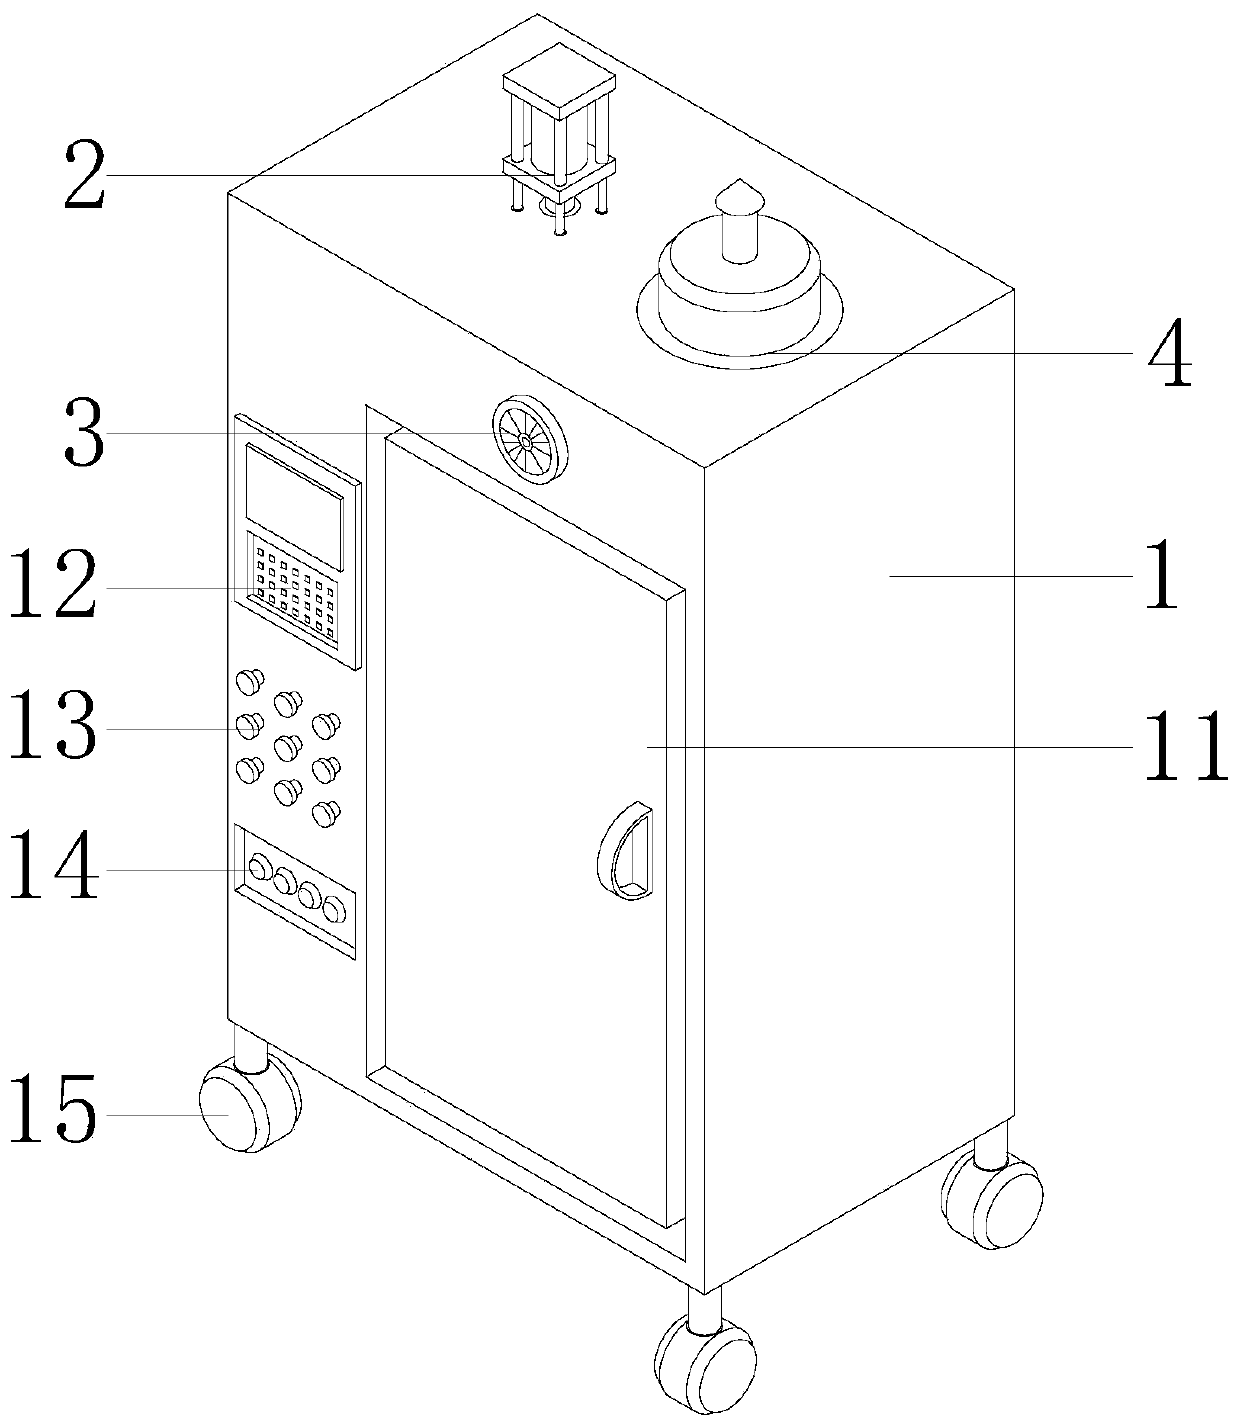 Multi-angle turnover structure of roast duck baking chamber